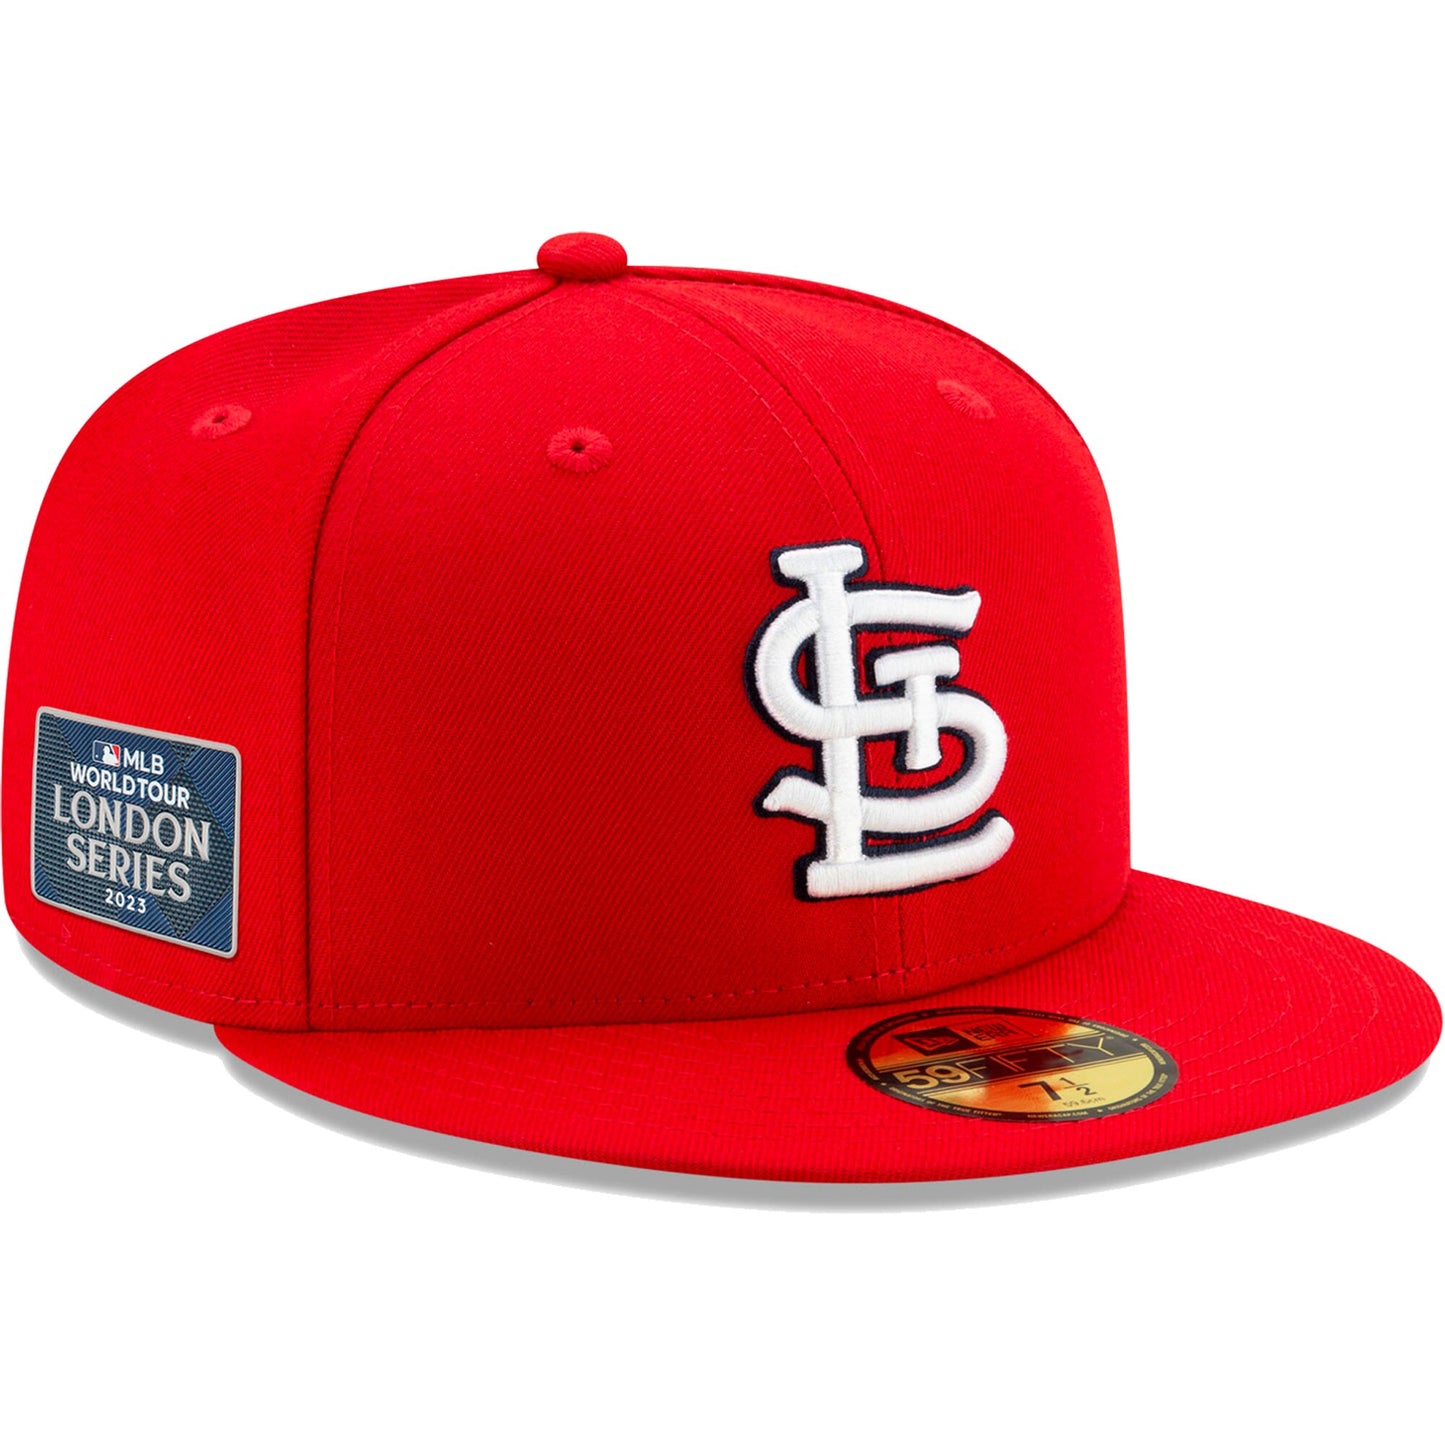 St. Louis Cardinals New Era On-Field 2023 World Tour London Series 59FIFTY Fitted Hat - Red